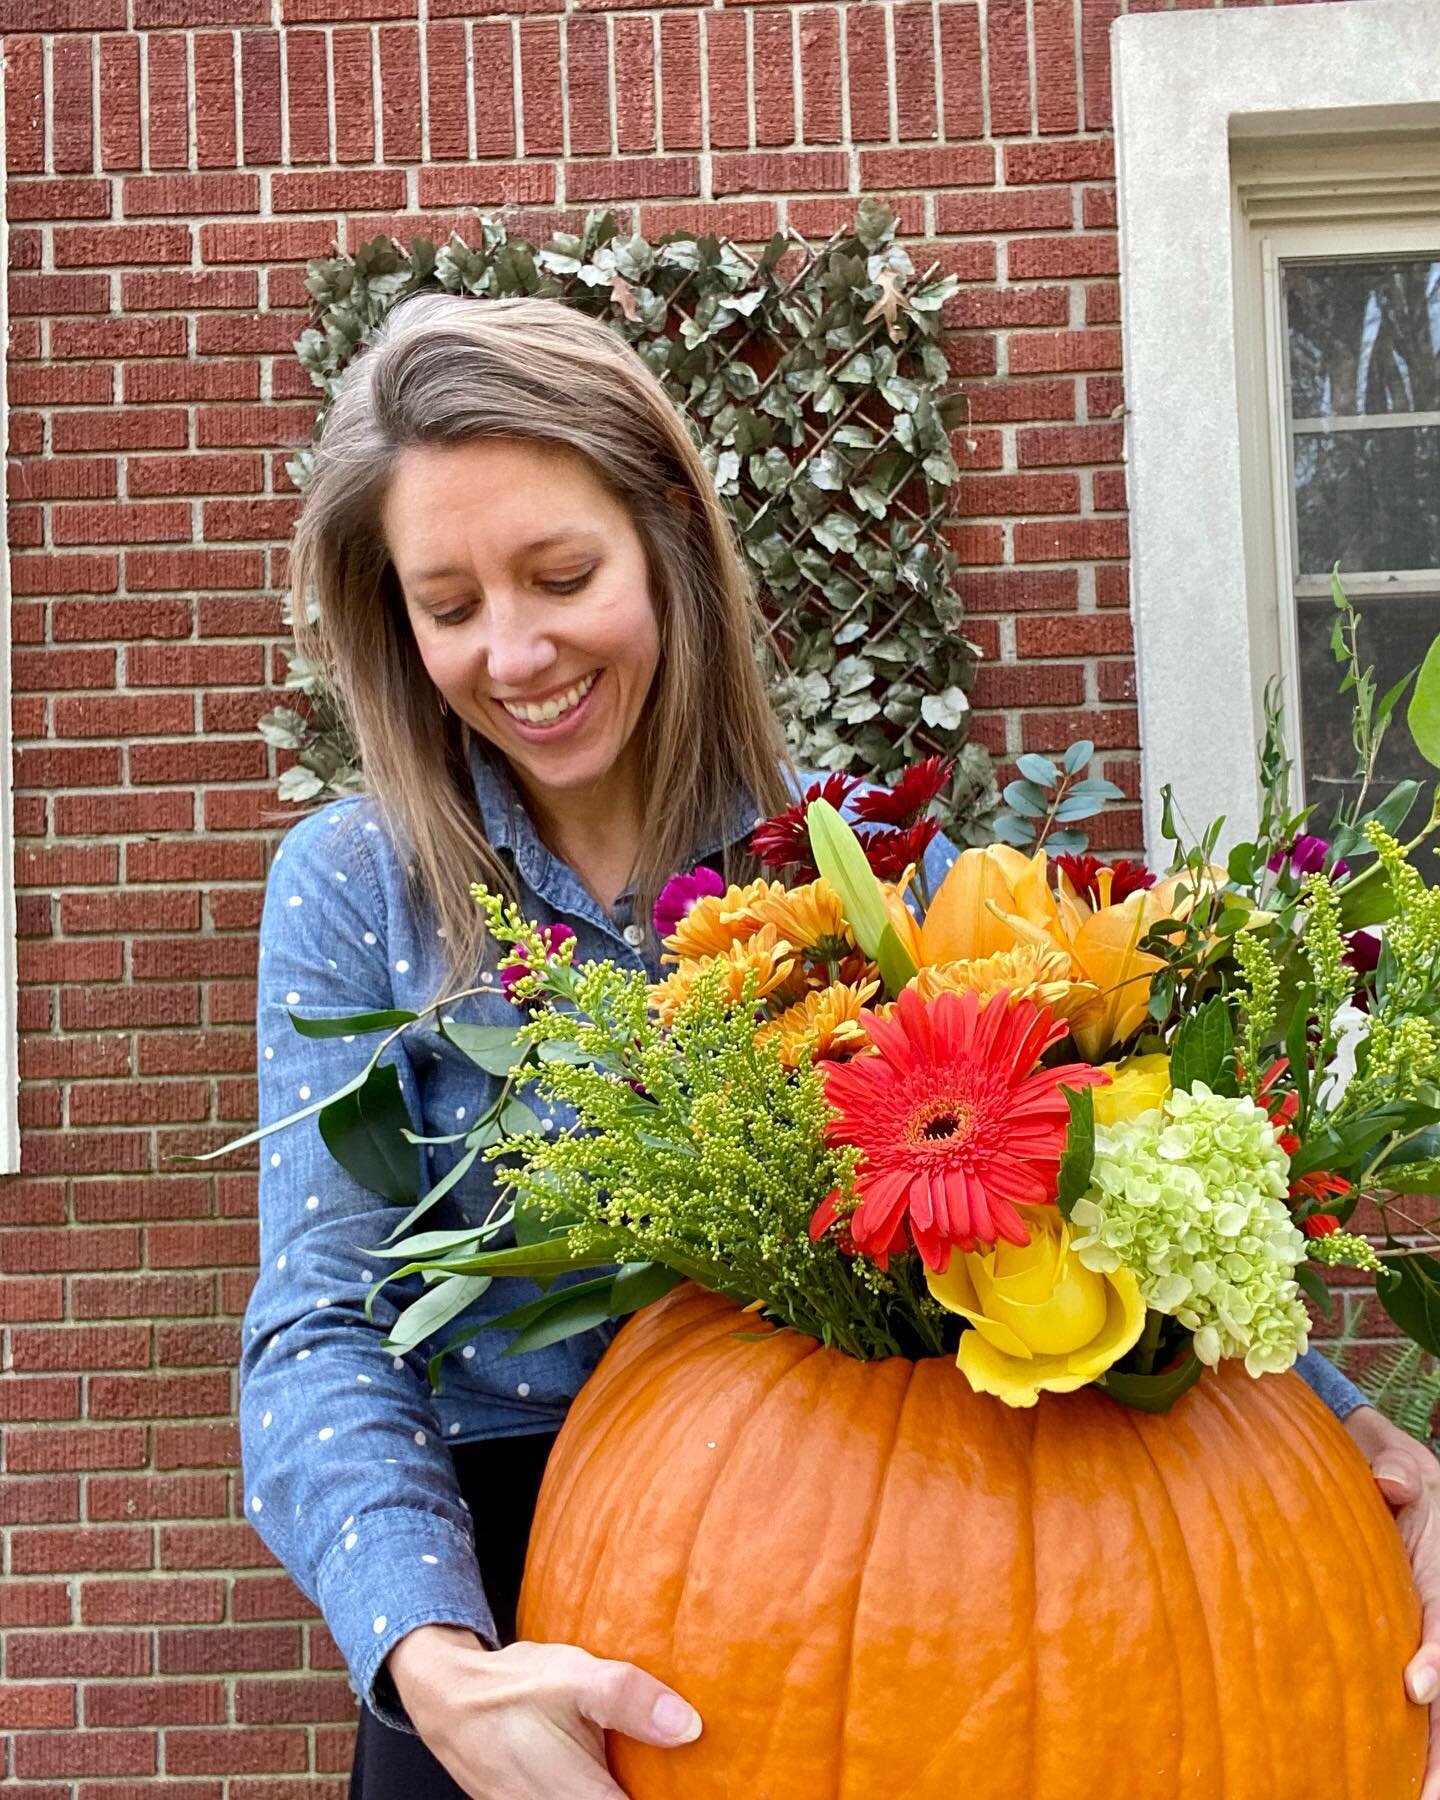 IDEA for your Thanksgiving table 

I didn&rsquo;t carve my pumpkin this year. It&rsquo;s still sitting on my porch. Pretty and imperfect. 

Instead of triangular eyes, I decided to turn it into a vessel for flowers! 

Take your pumpkin and transform 